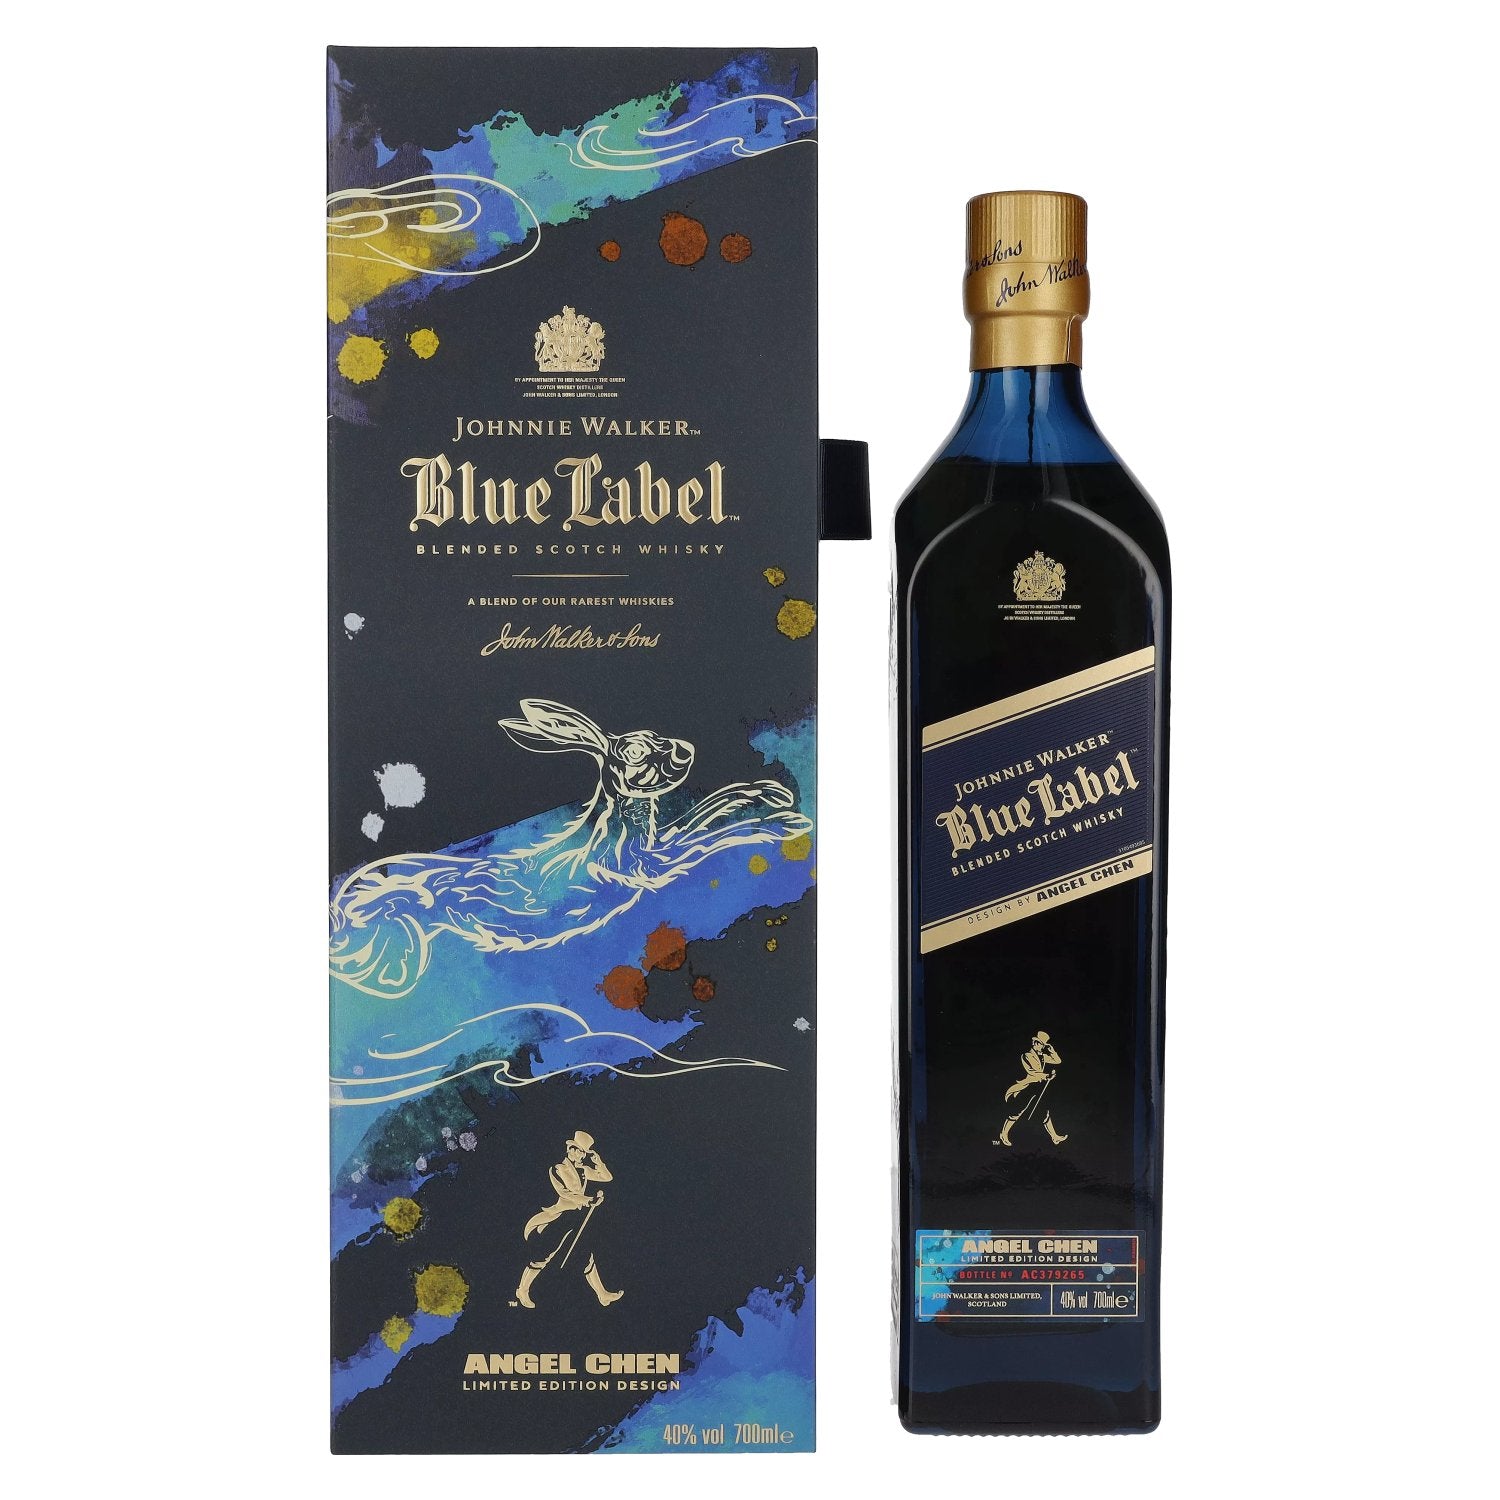 Johnnie Walker Blue Label YEAR OF THE RABBIT 2022 40% Vol. 0,7l in Giftbox